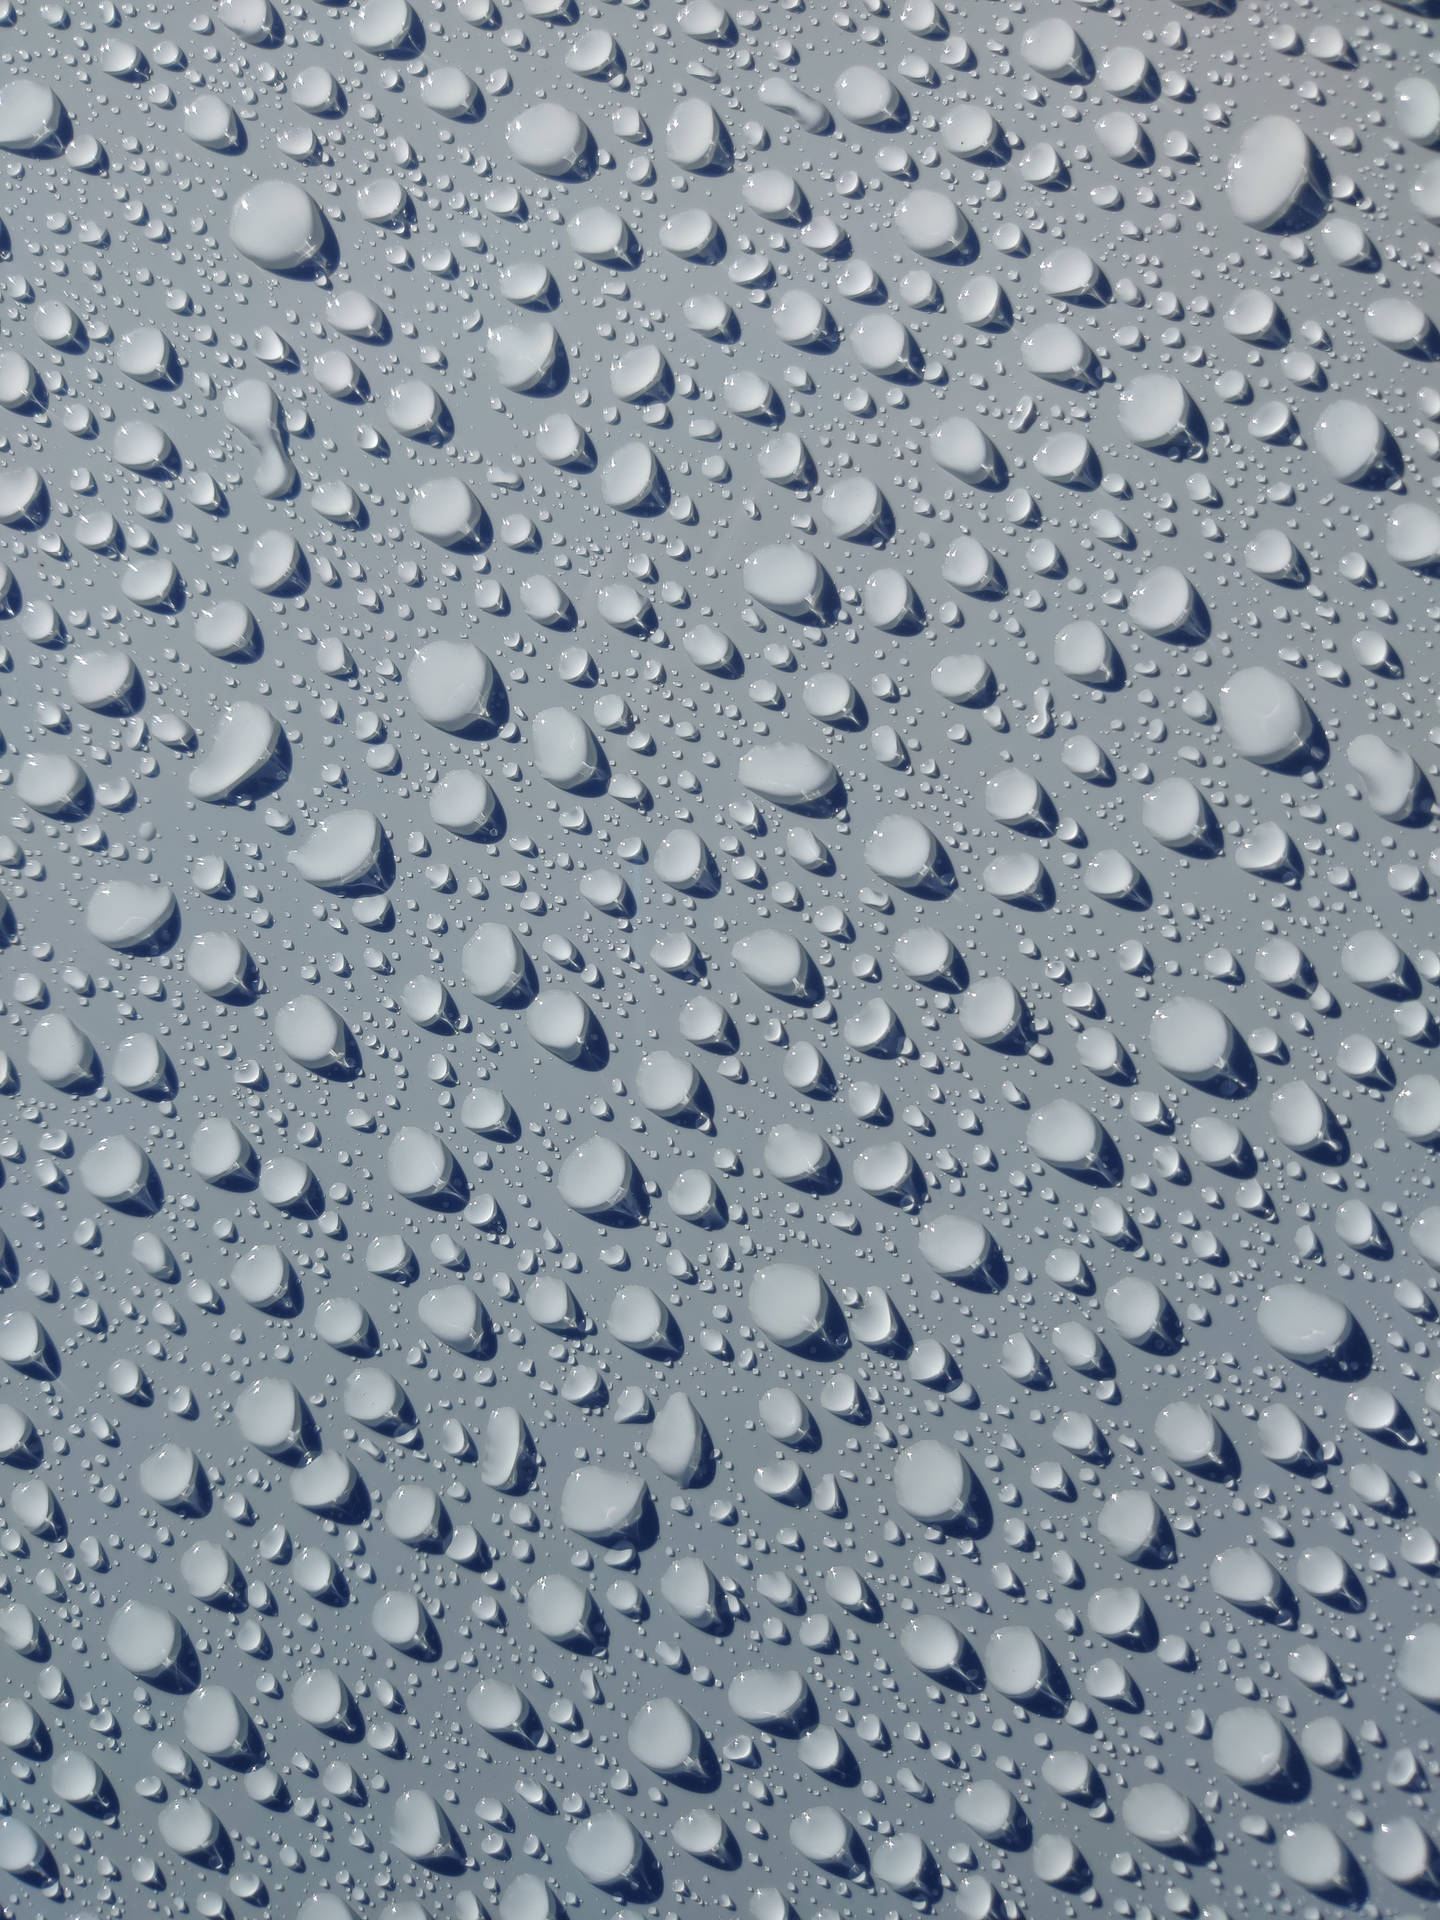 Textured Water Droplets